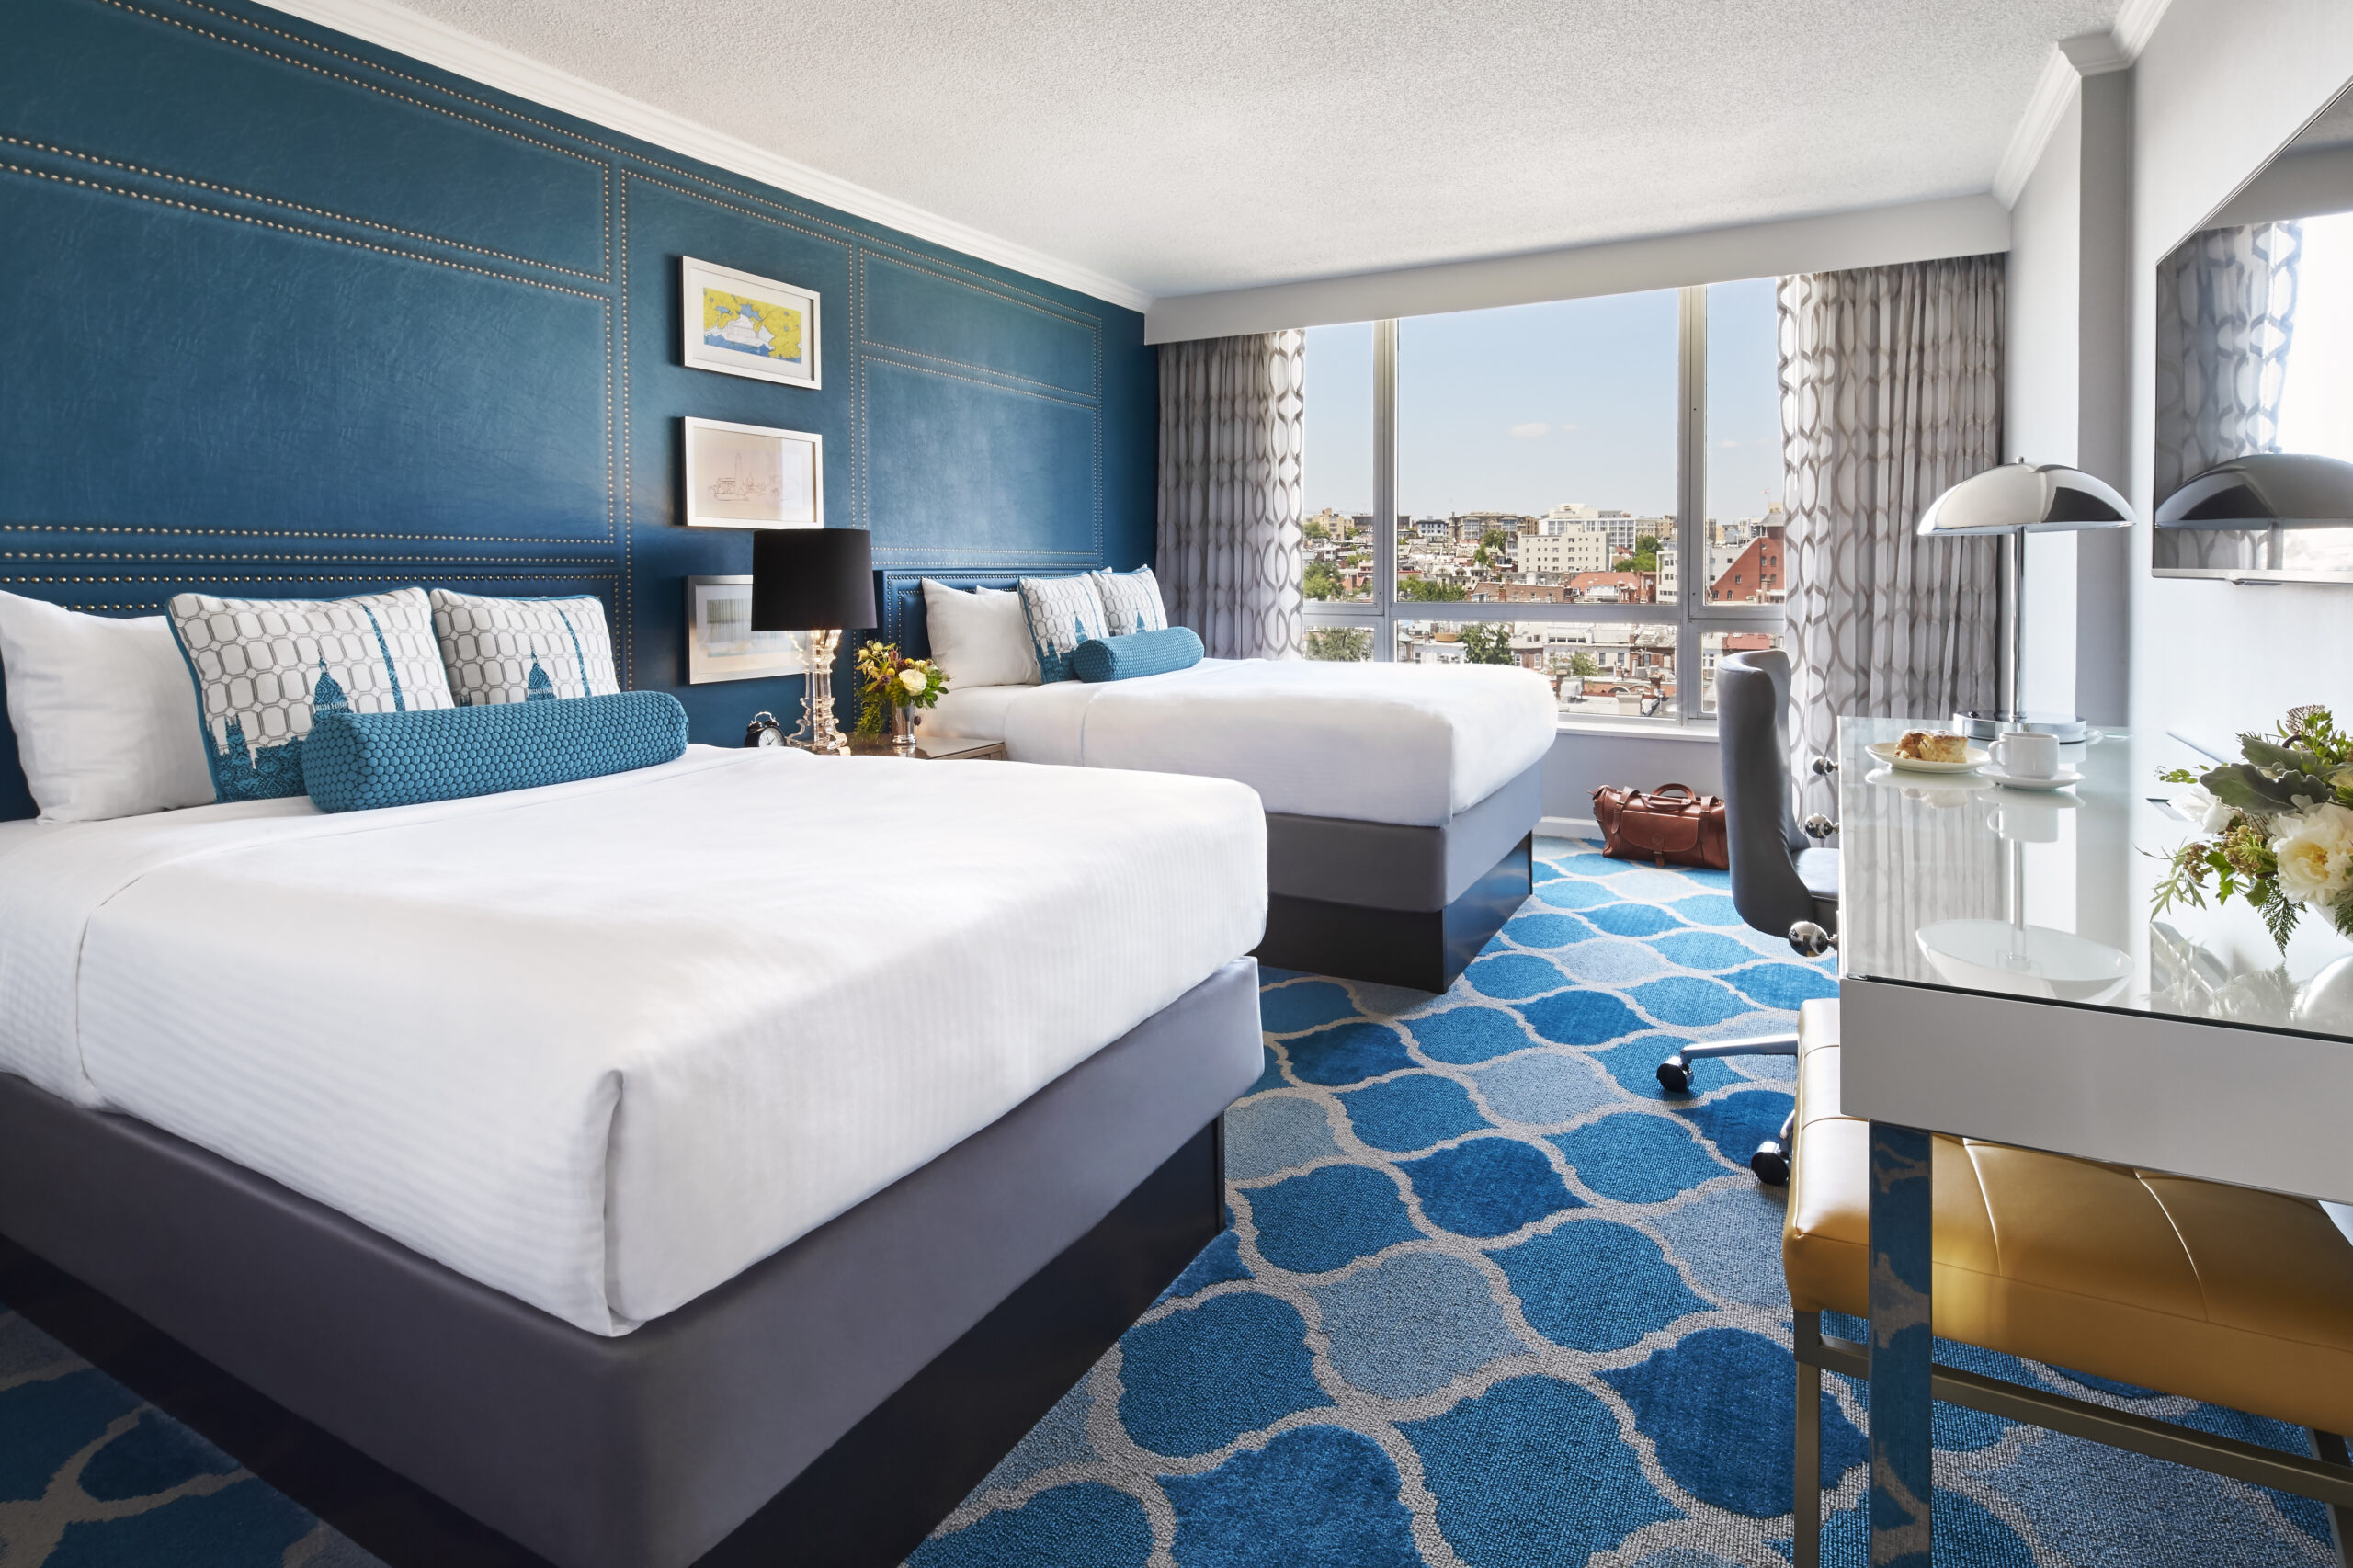 Double Deluxe City Room (Photo Credit: The Ven at Embassy Row)